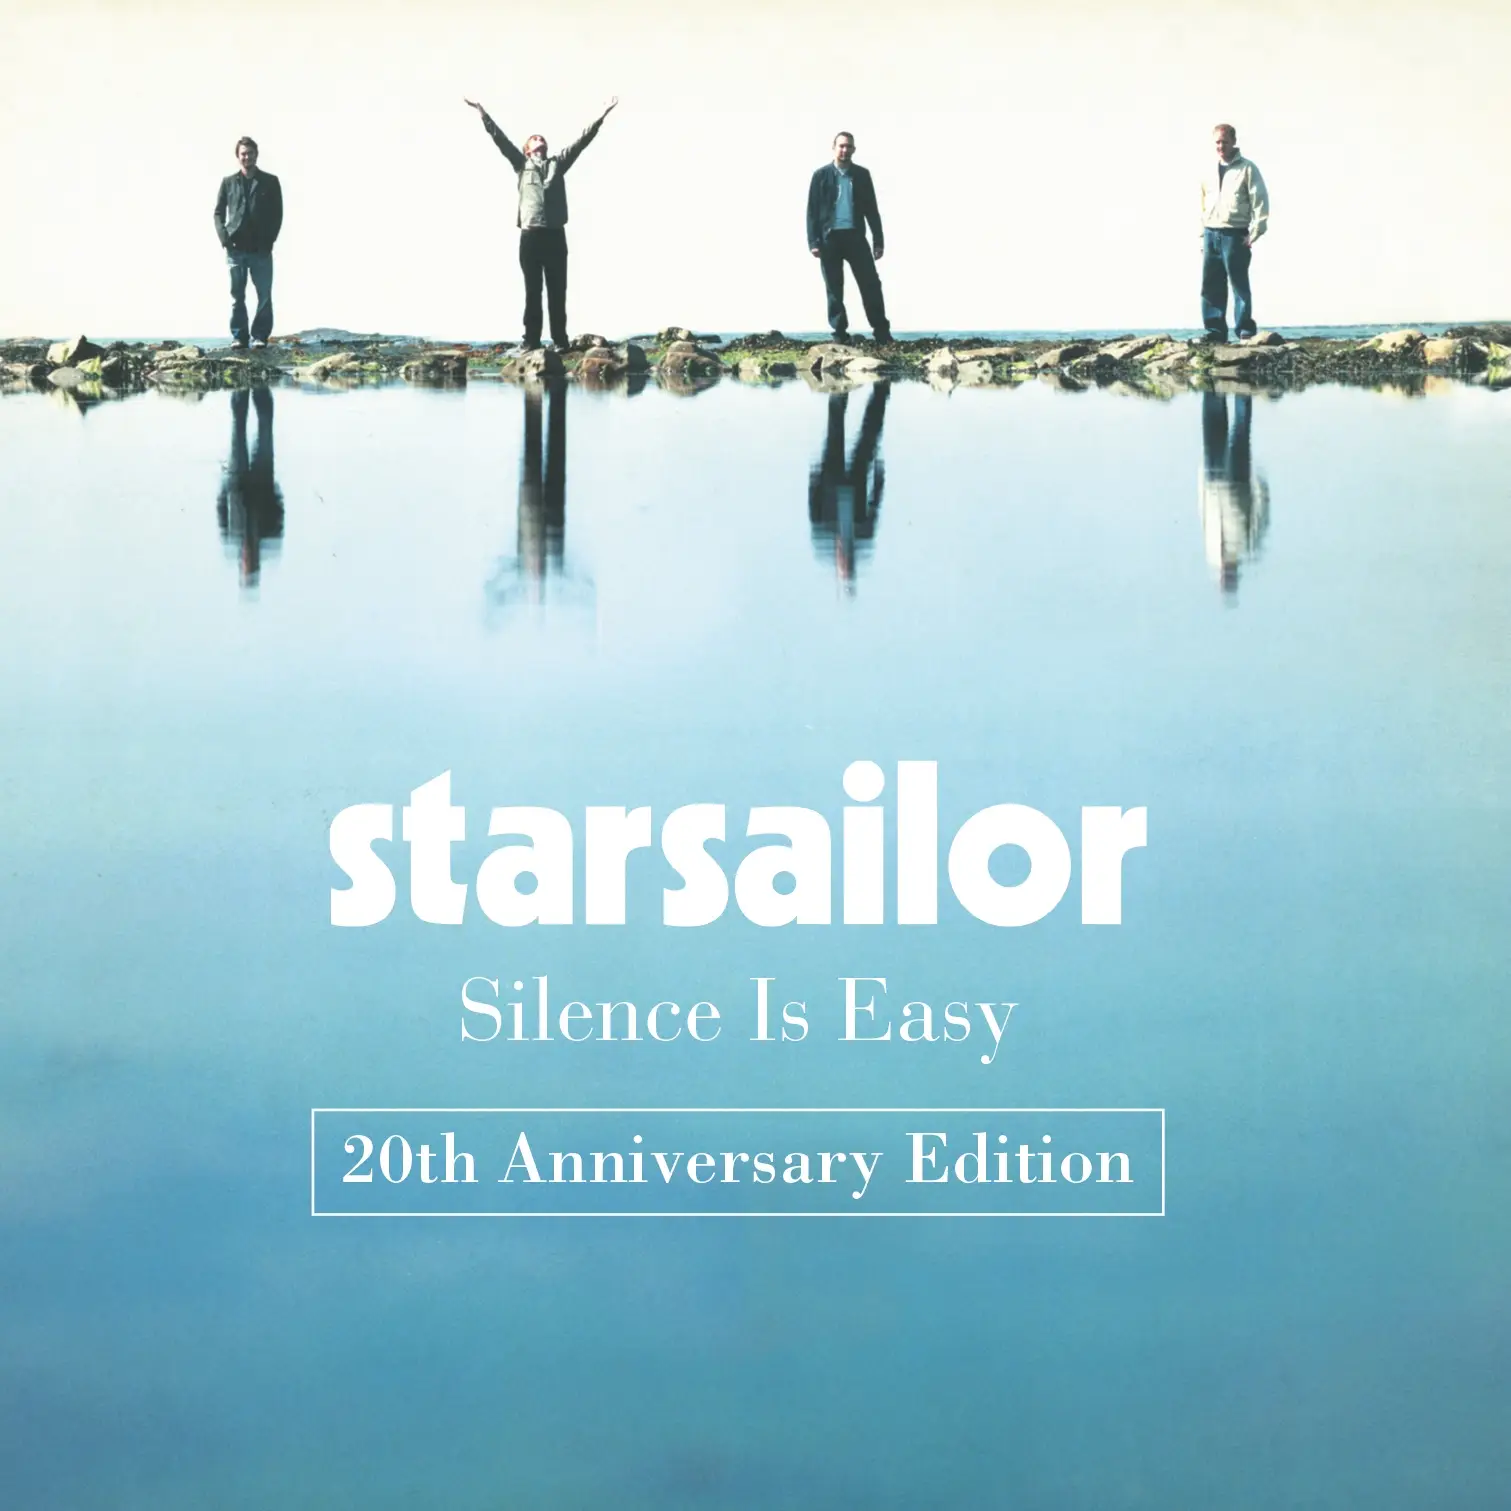 <strong>Starsailor - Silence Is Easy (20th Anniversary Edition)</strong> (Vinyl LP - turquoise)